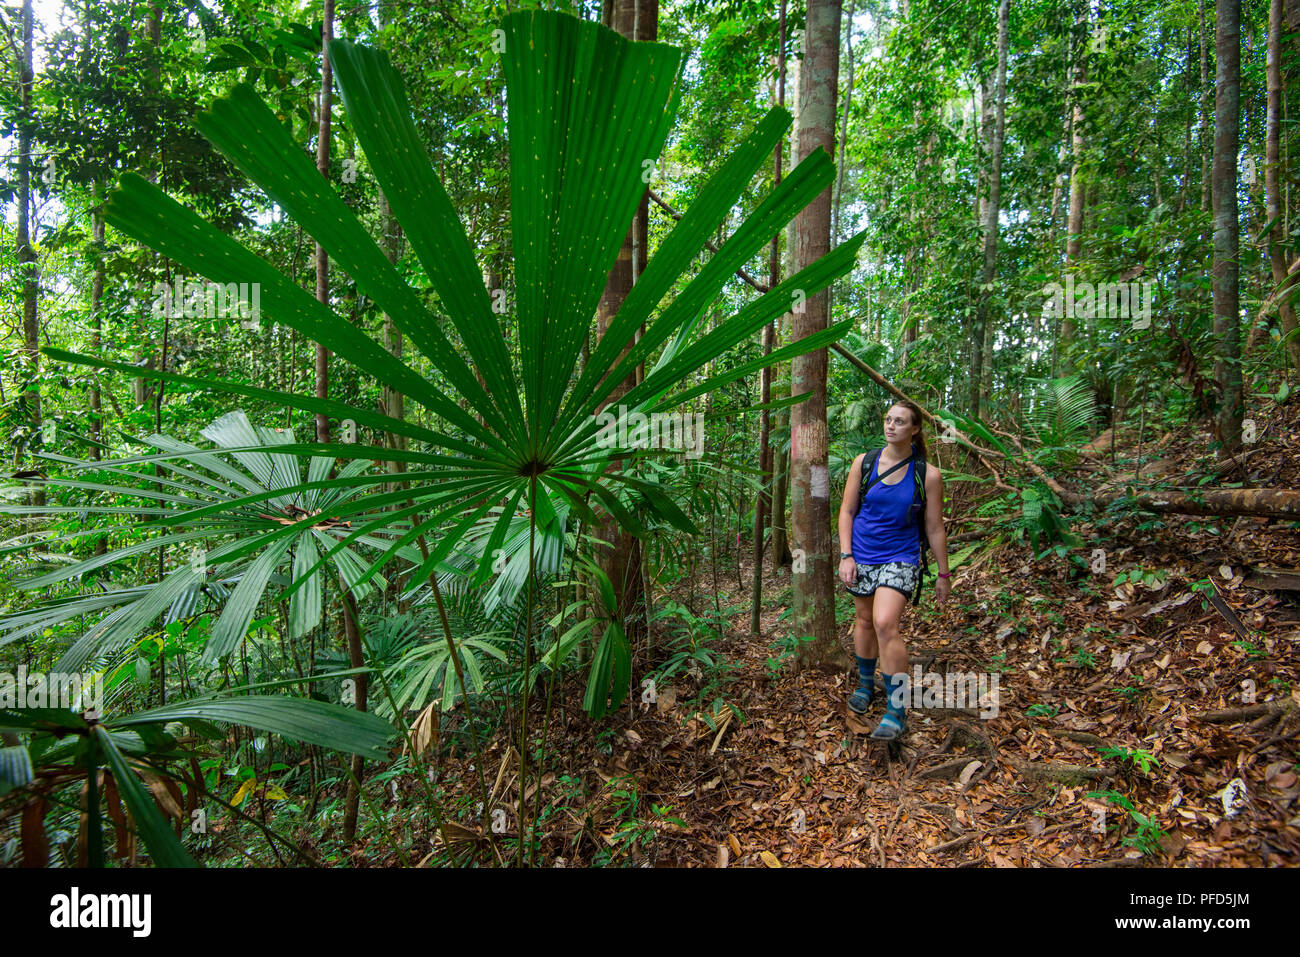 Western female tourist walking through the tropical rainforest looking at a giant palm frond at Lambir Hills National Park, Sarawak, Malaysian Borneo Stock Photo